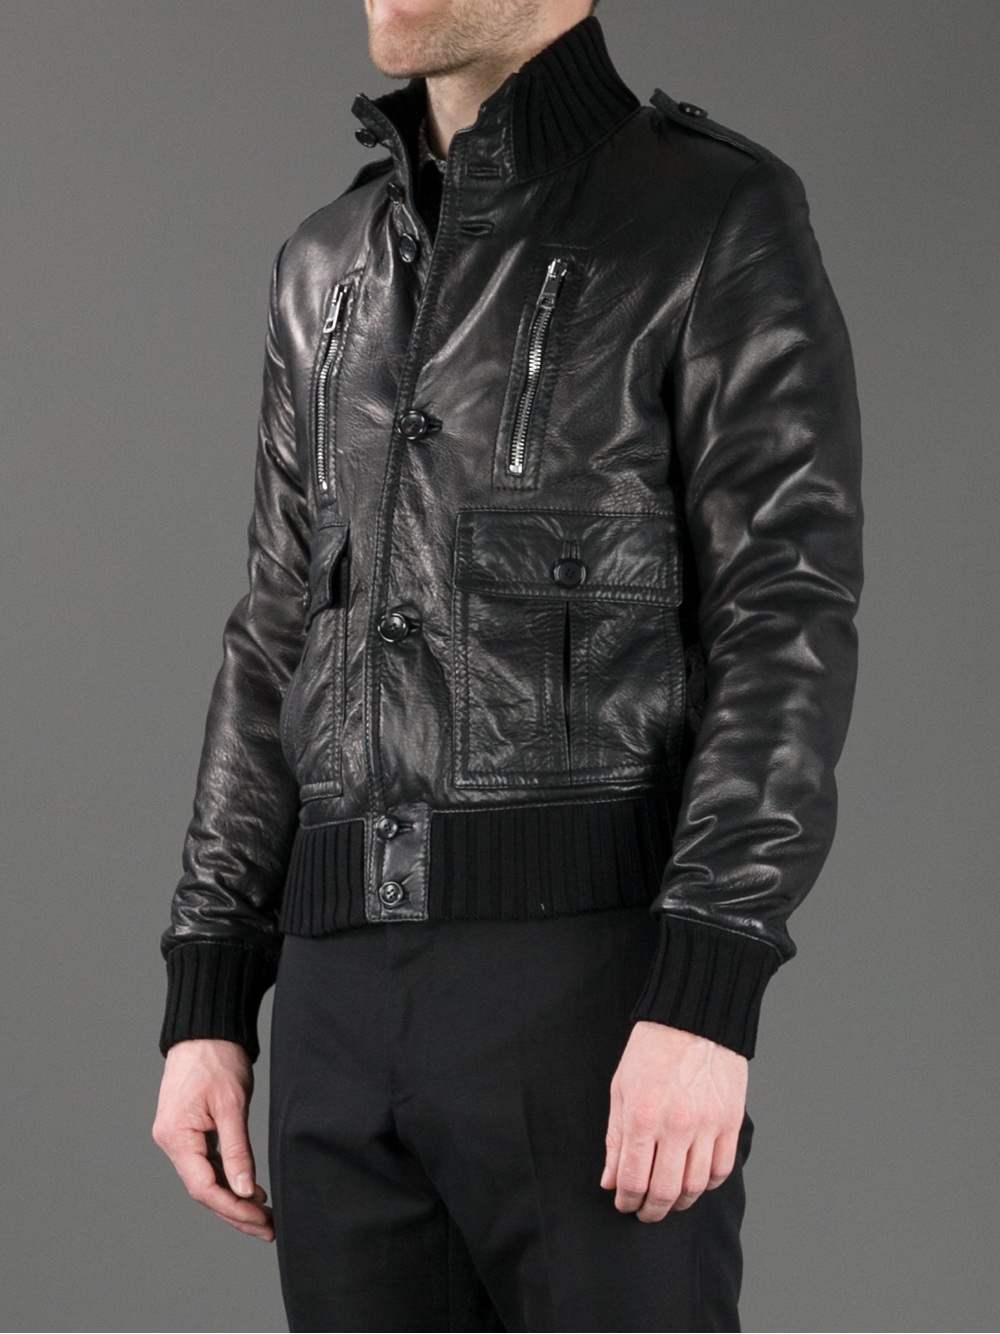 Gucci Leather Jacket in Black for Men - Lyst